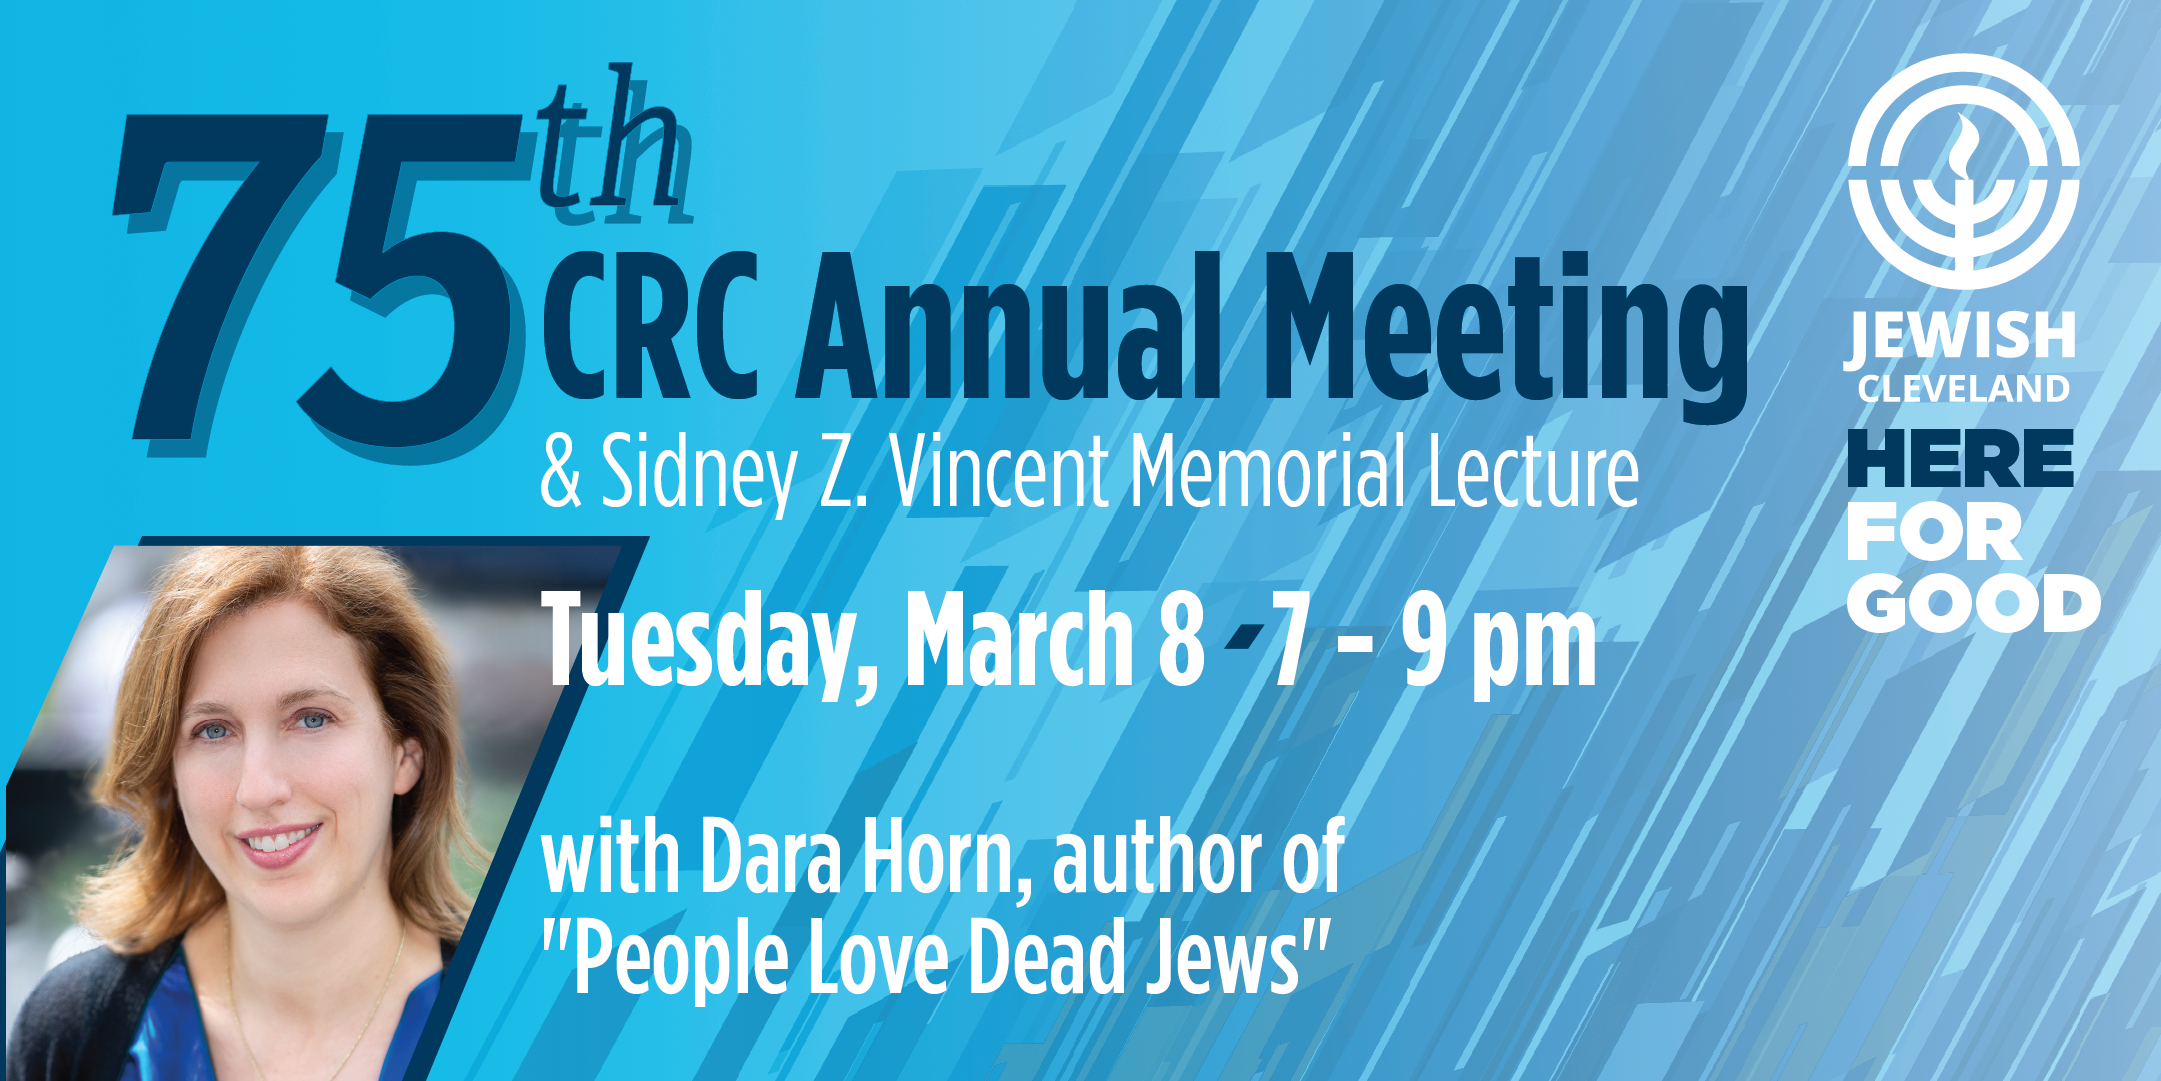 Community Relations Annual Meeting to Focus on Antisemitism